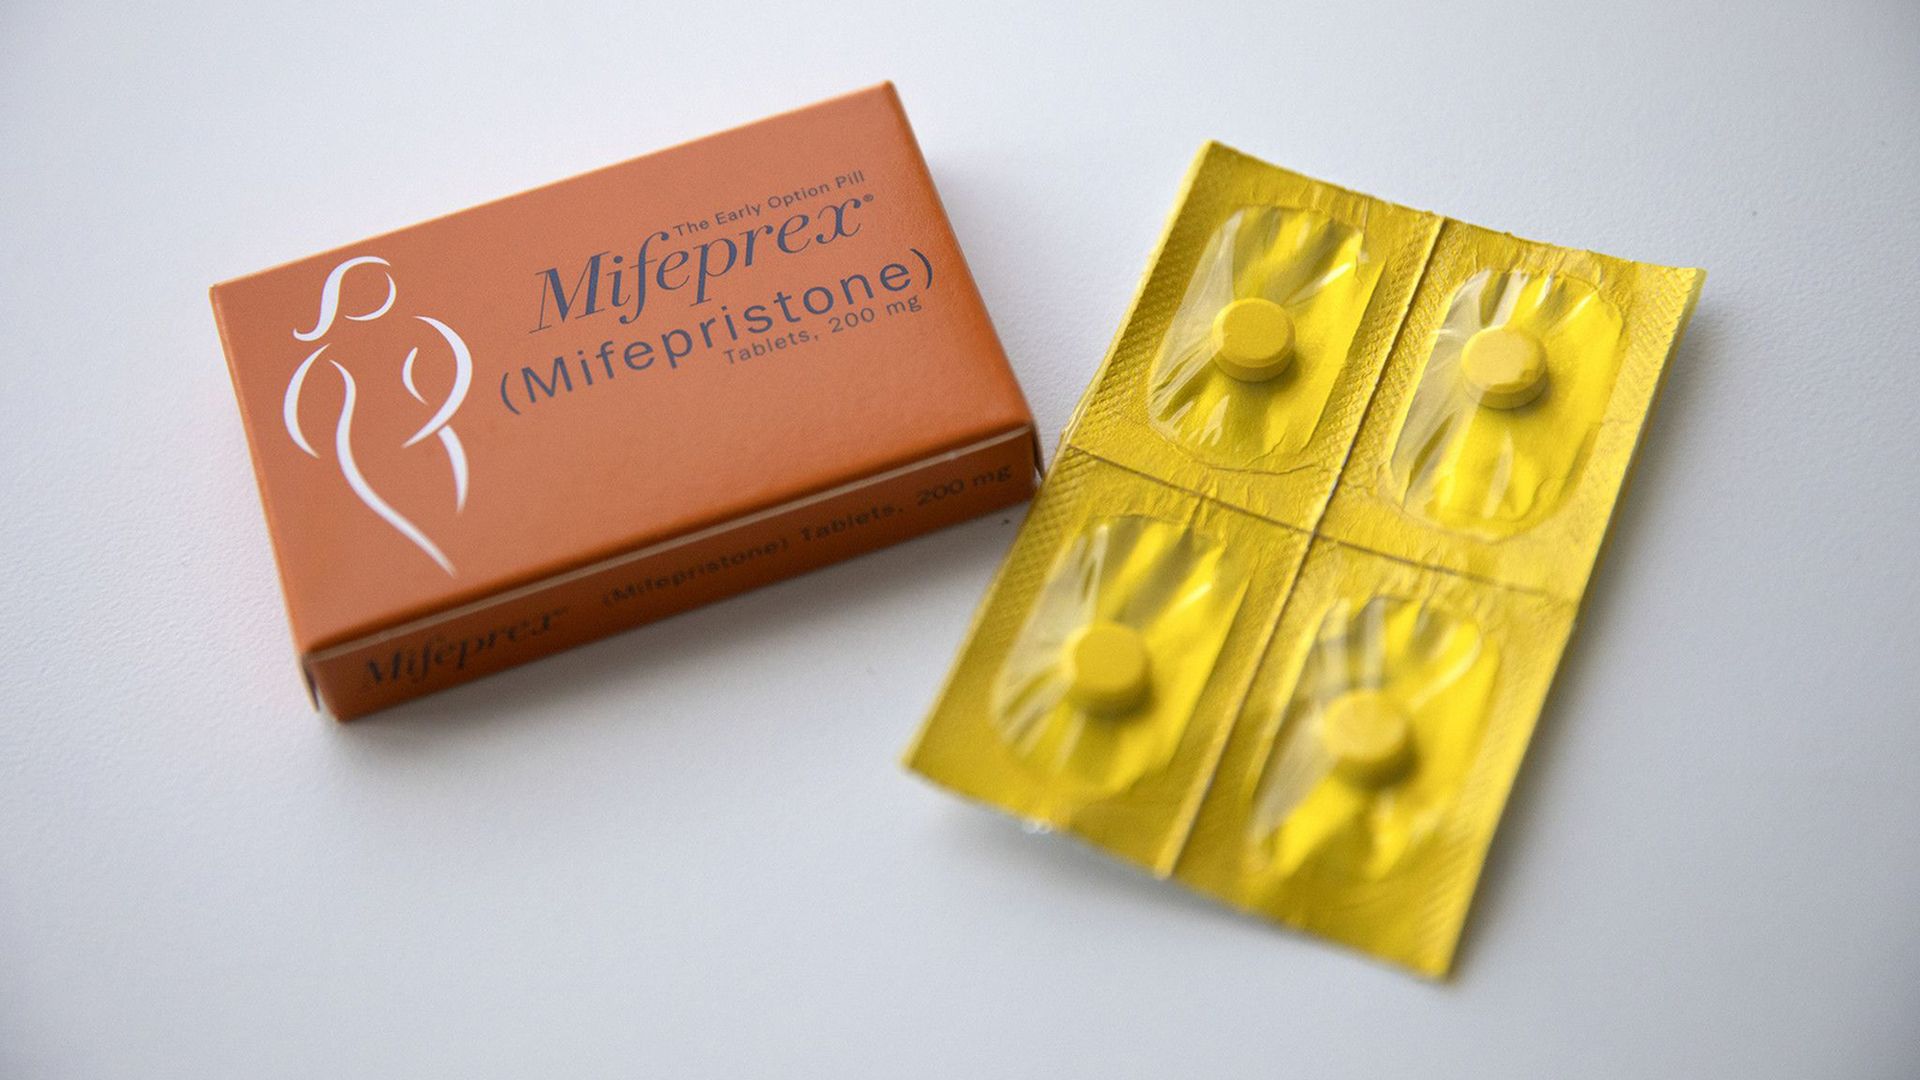 In this 2018 photo, mifepristone and misoprostol pills are provided at a Carafem clinic for medication abortions in Skokie, Illinois. 